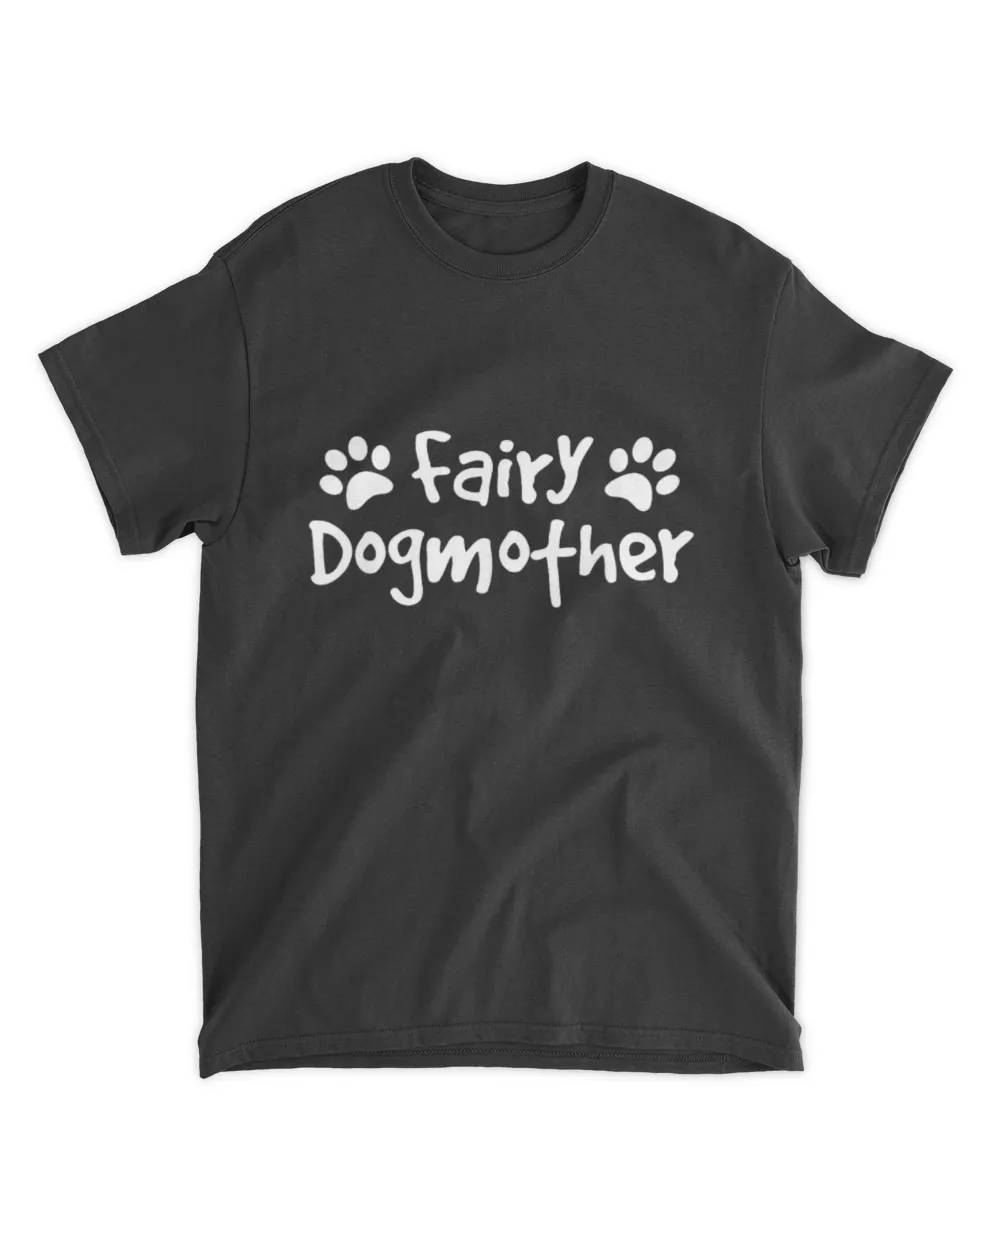 Fairy Dog Mother Shirt, Puppy Paw Mom Tee For Dog Owner